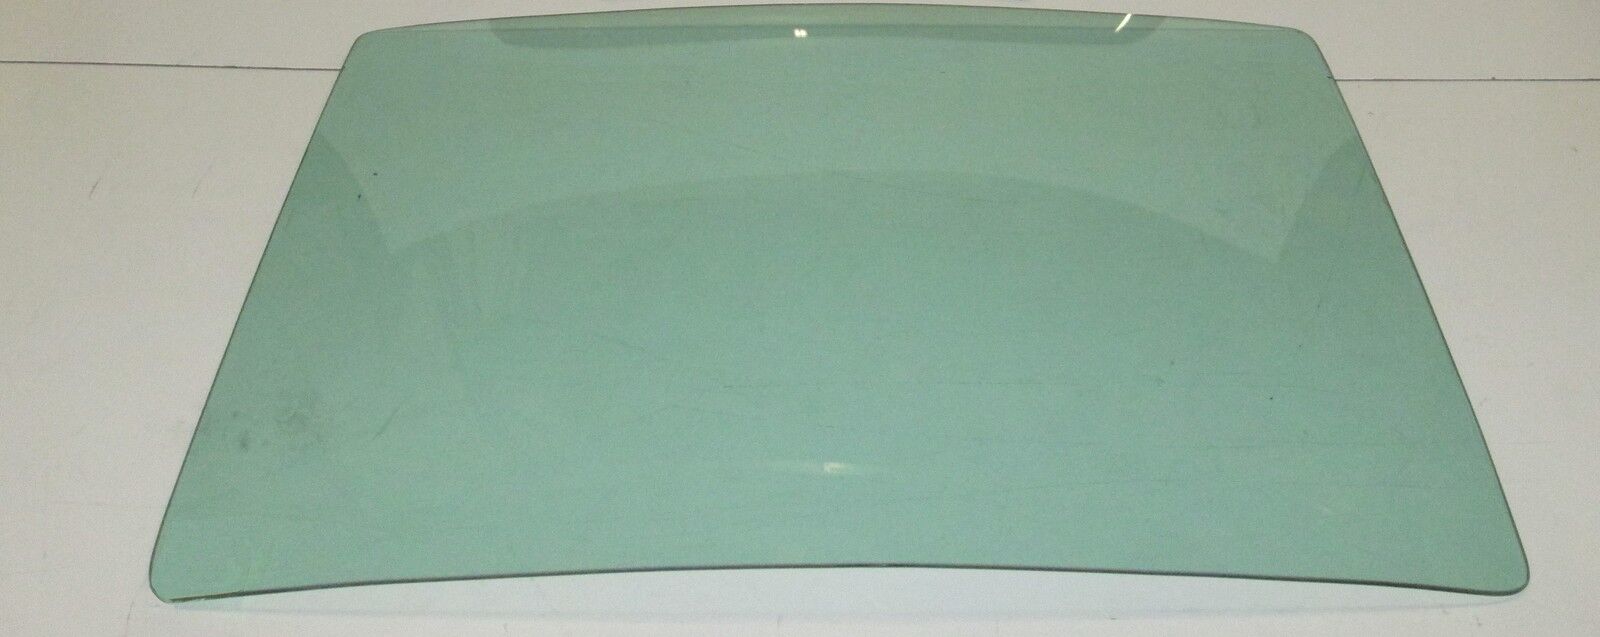 Back Glass for 1969 1970 Ford Mustang Fastback Original Green Tint Rear Window